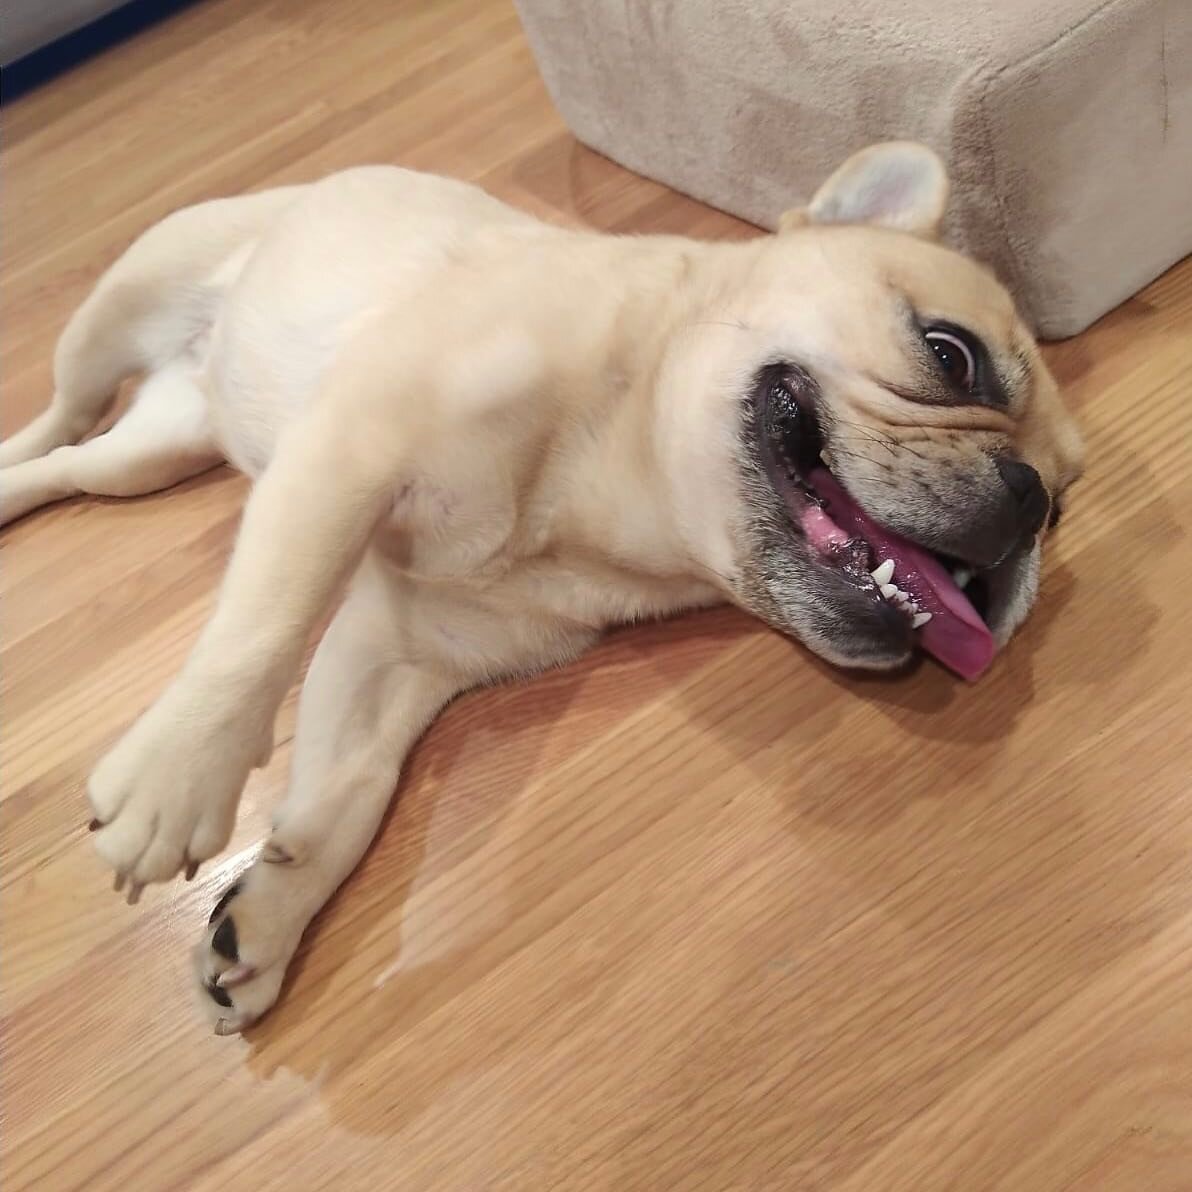 Phew. It&rsquo;s finally Friday! (Don&rsquo;t worry this is me after playing a lot not heat stroke) #friday #beenbusy #frenchielife #frenchiesofinstagram #frenchbulldog #dogs